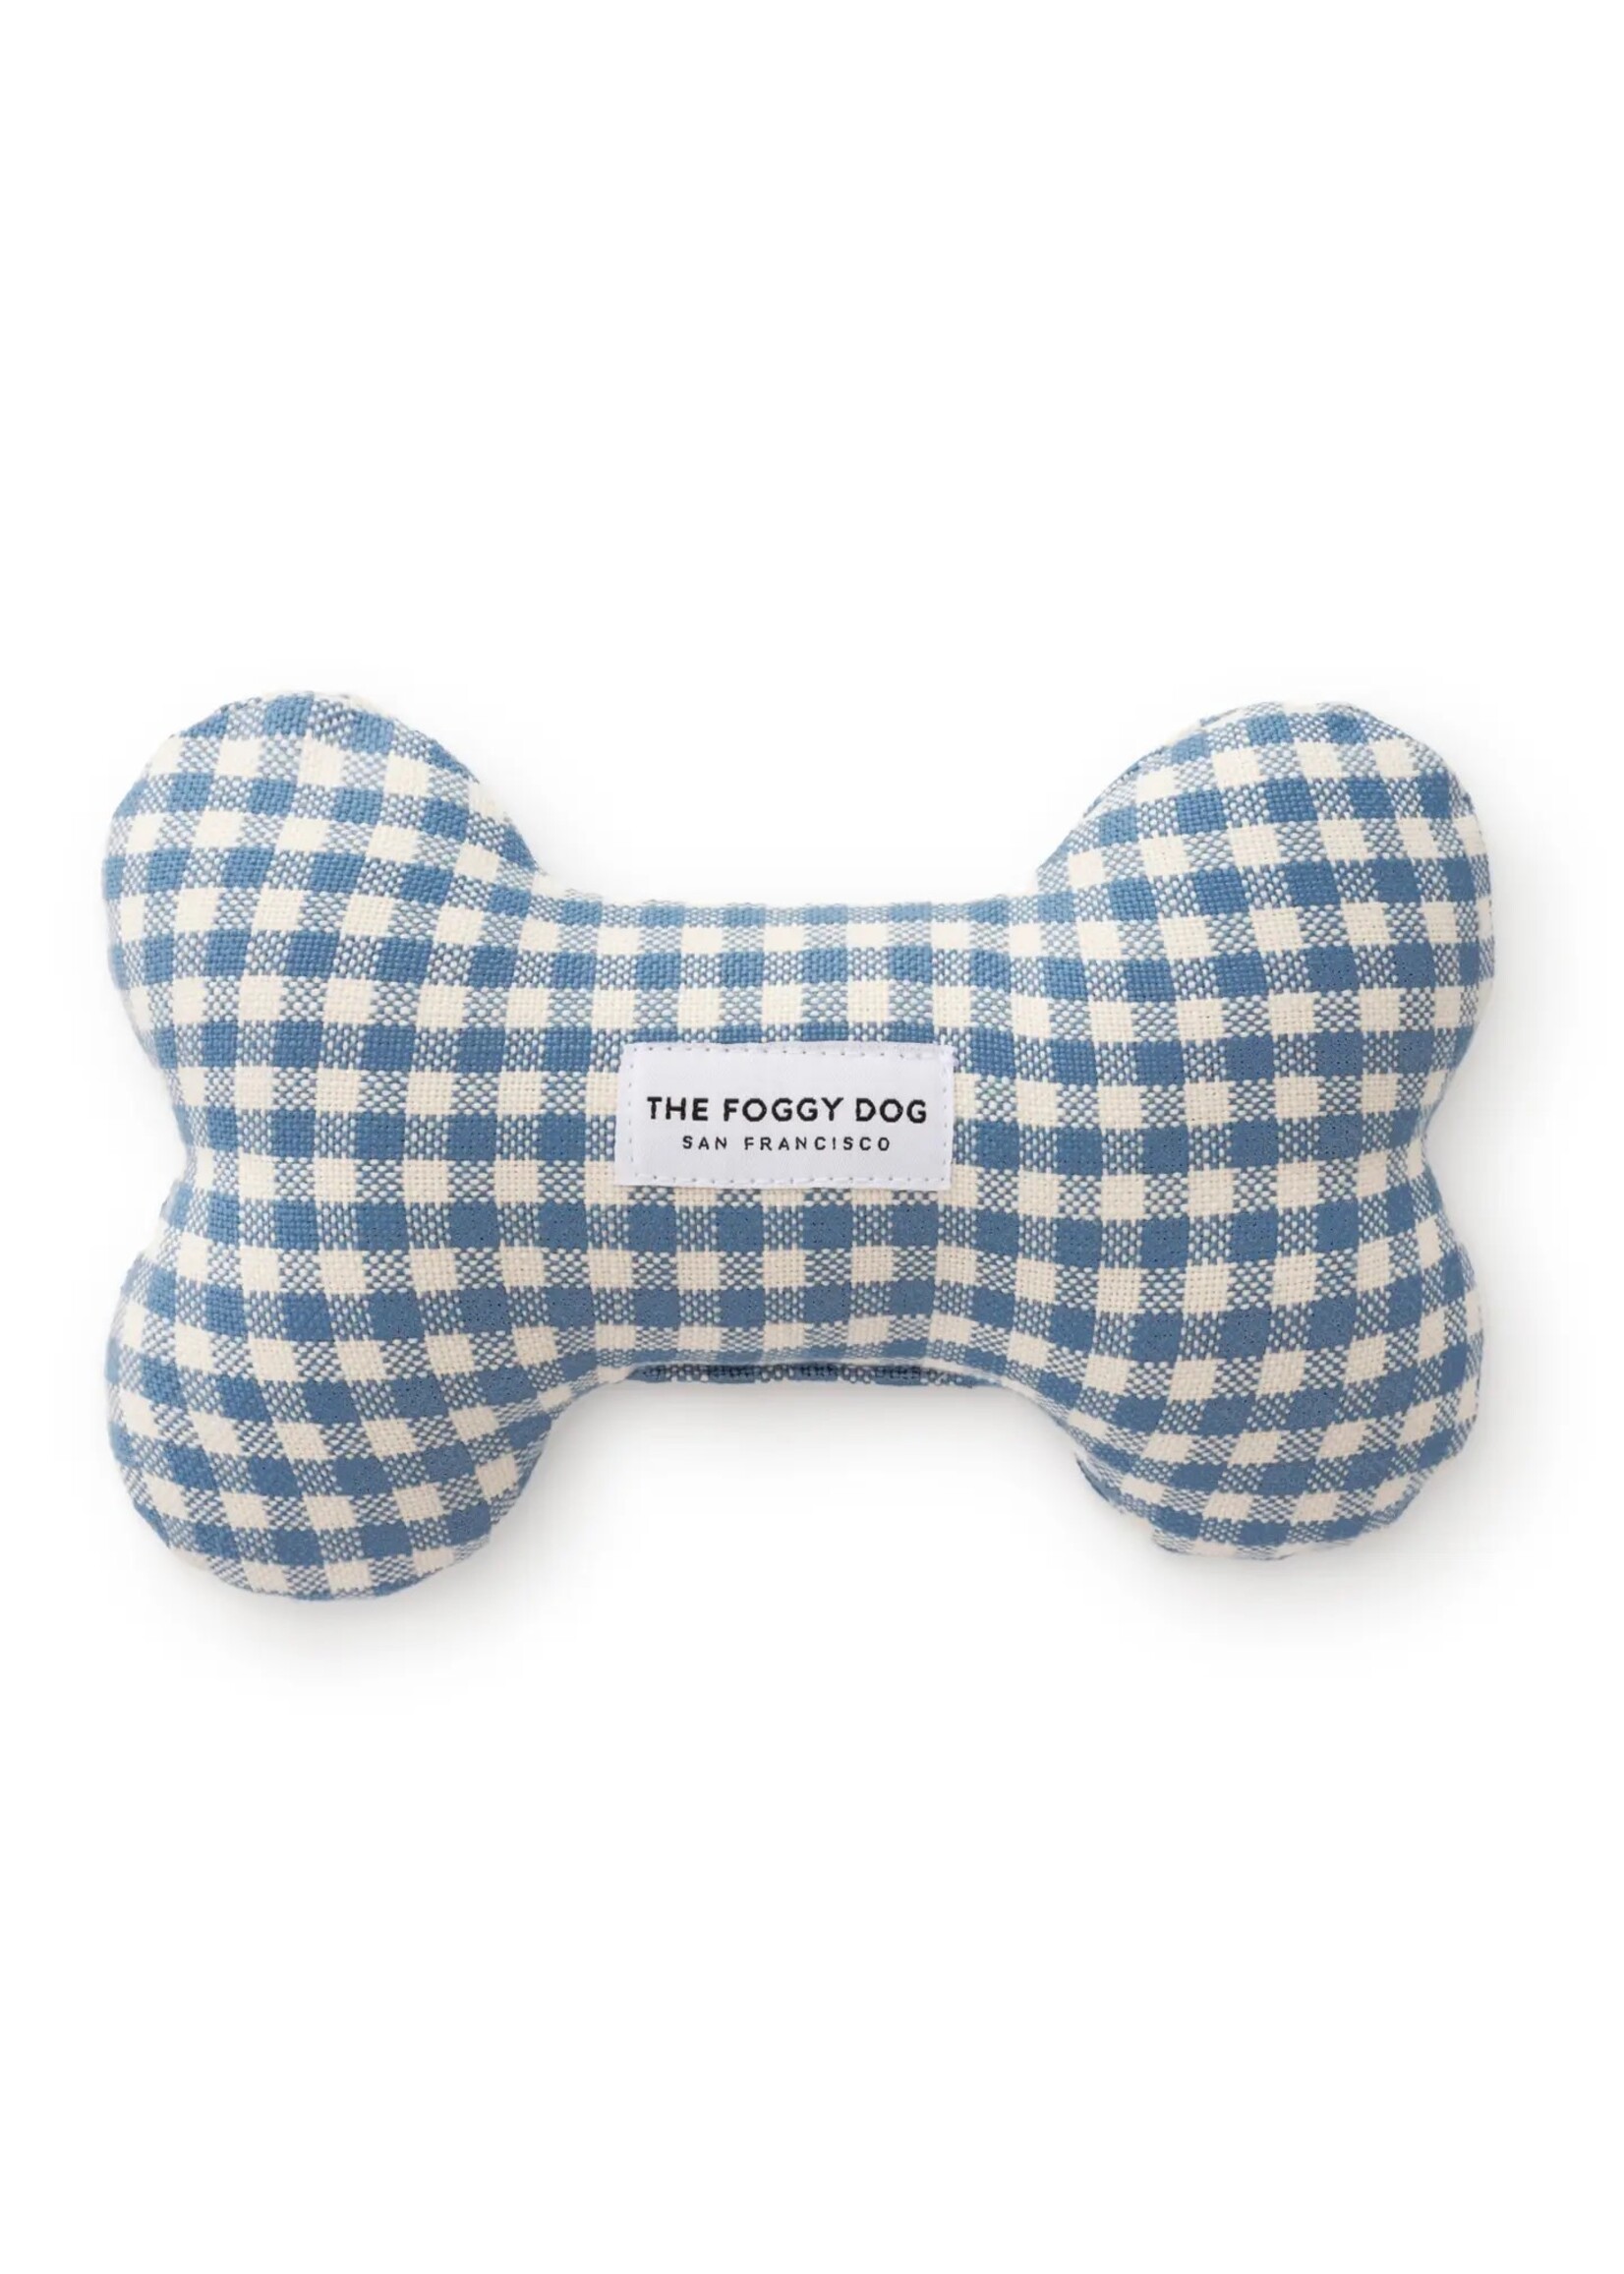 The Foggy Dog Blue Gingham - Squeaky Toy